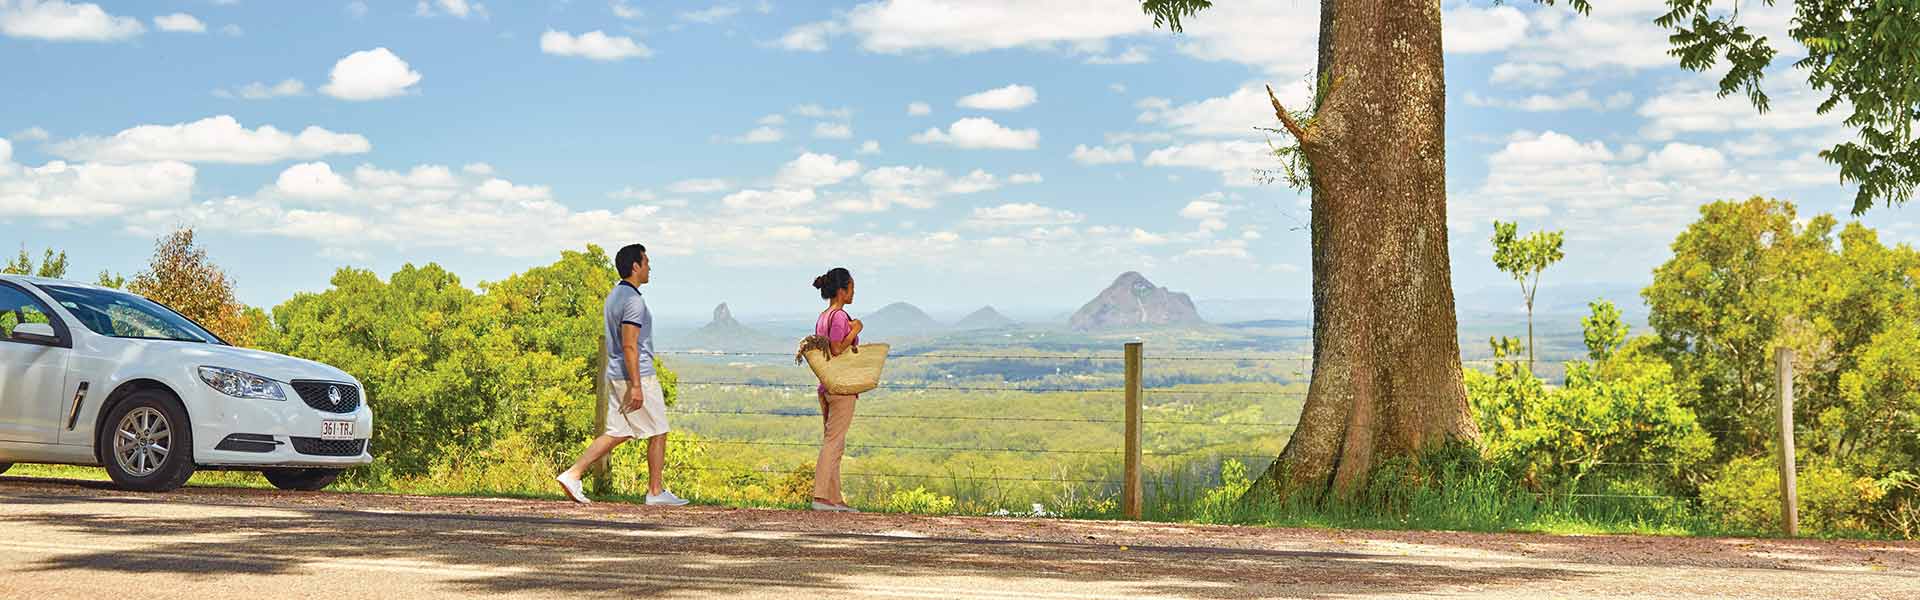 Glass House Mountains view Queensland